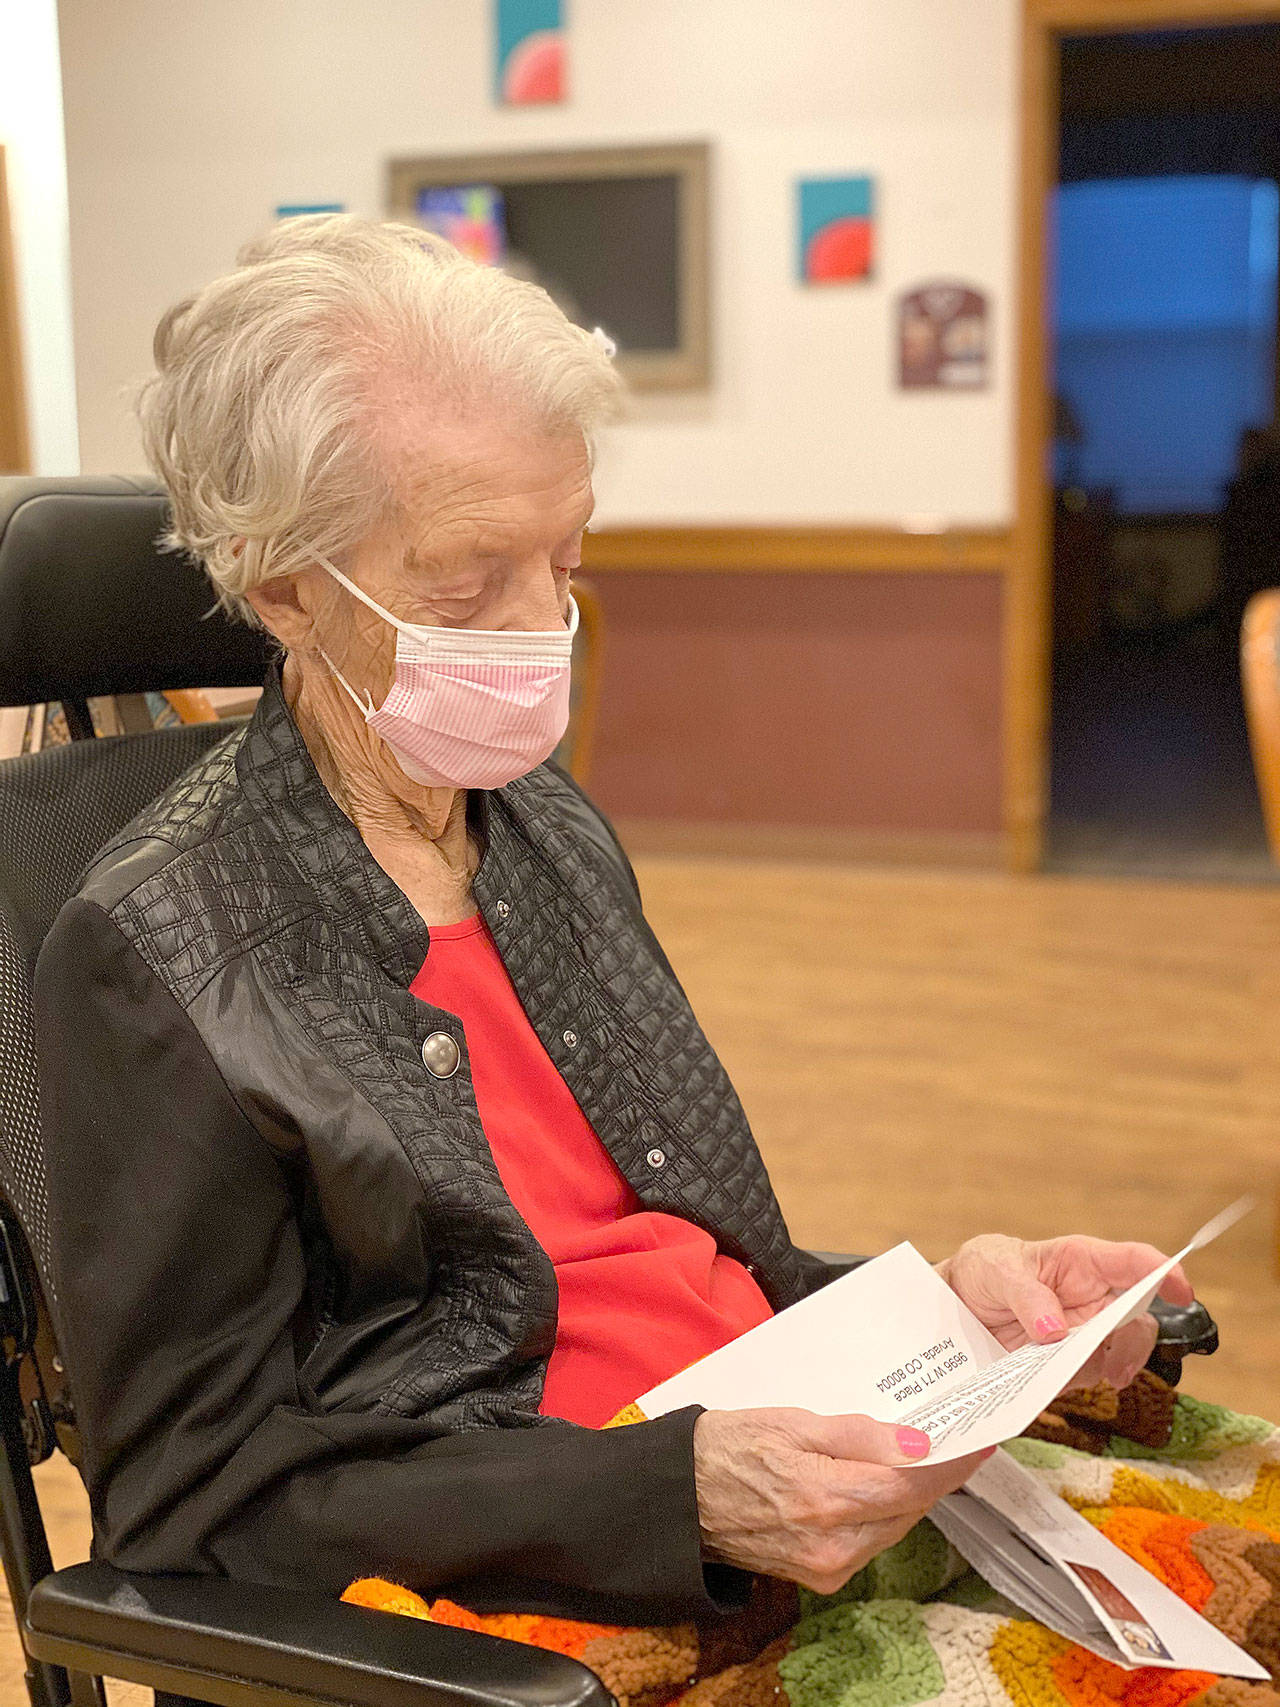 Navy aircrewman Mackenzie Ball is writing and collecting letters to send to residents at HomePlace at Oak Harbor Memory Care like Dottie Luce, many of whom have not had visitors for months. Photo courtesy of HomePlace at Oak Harbor Memory Care